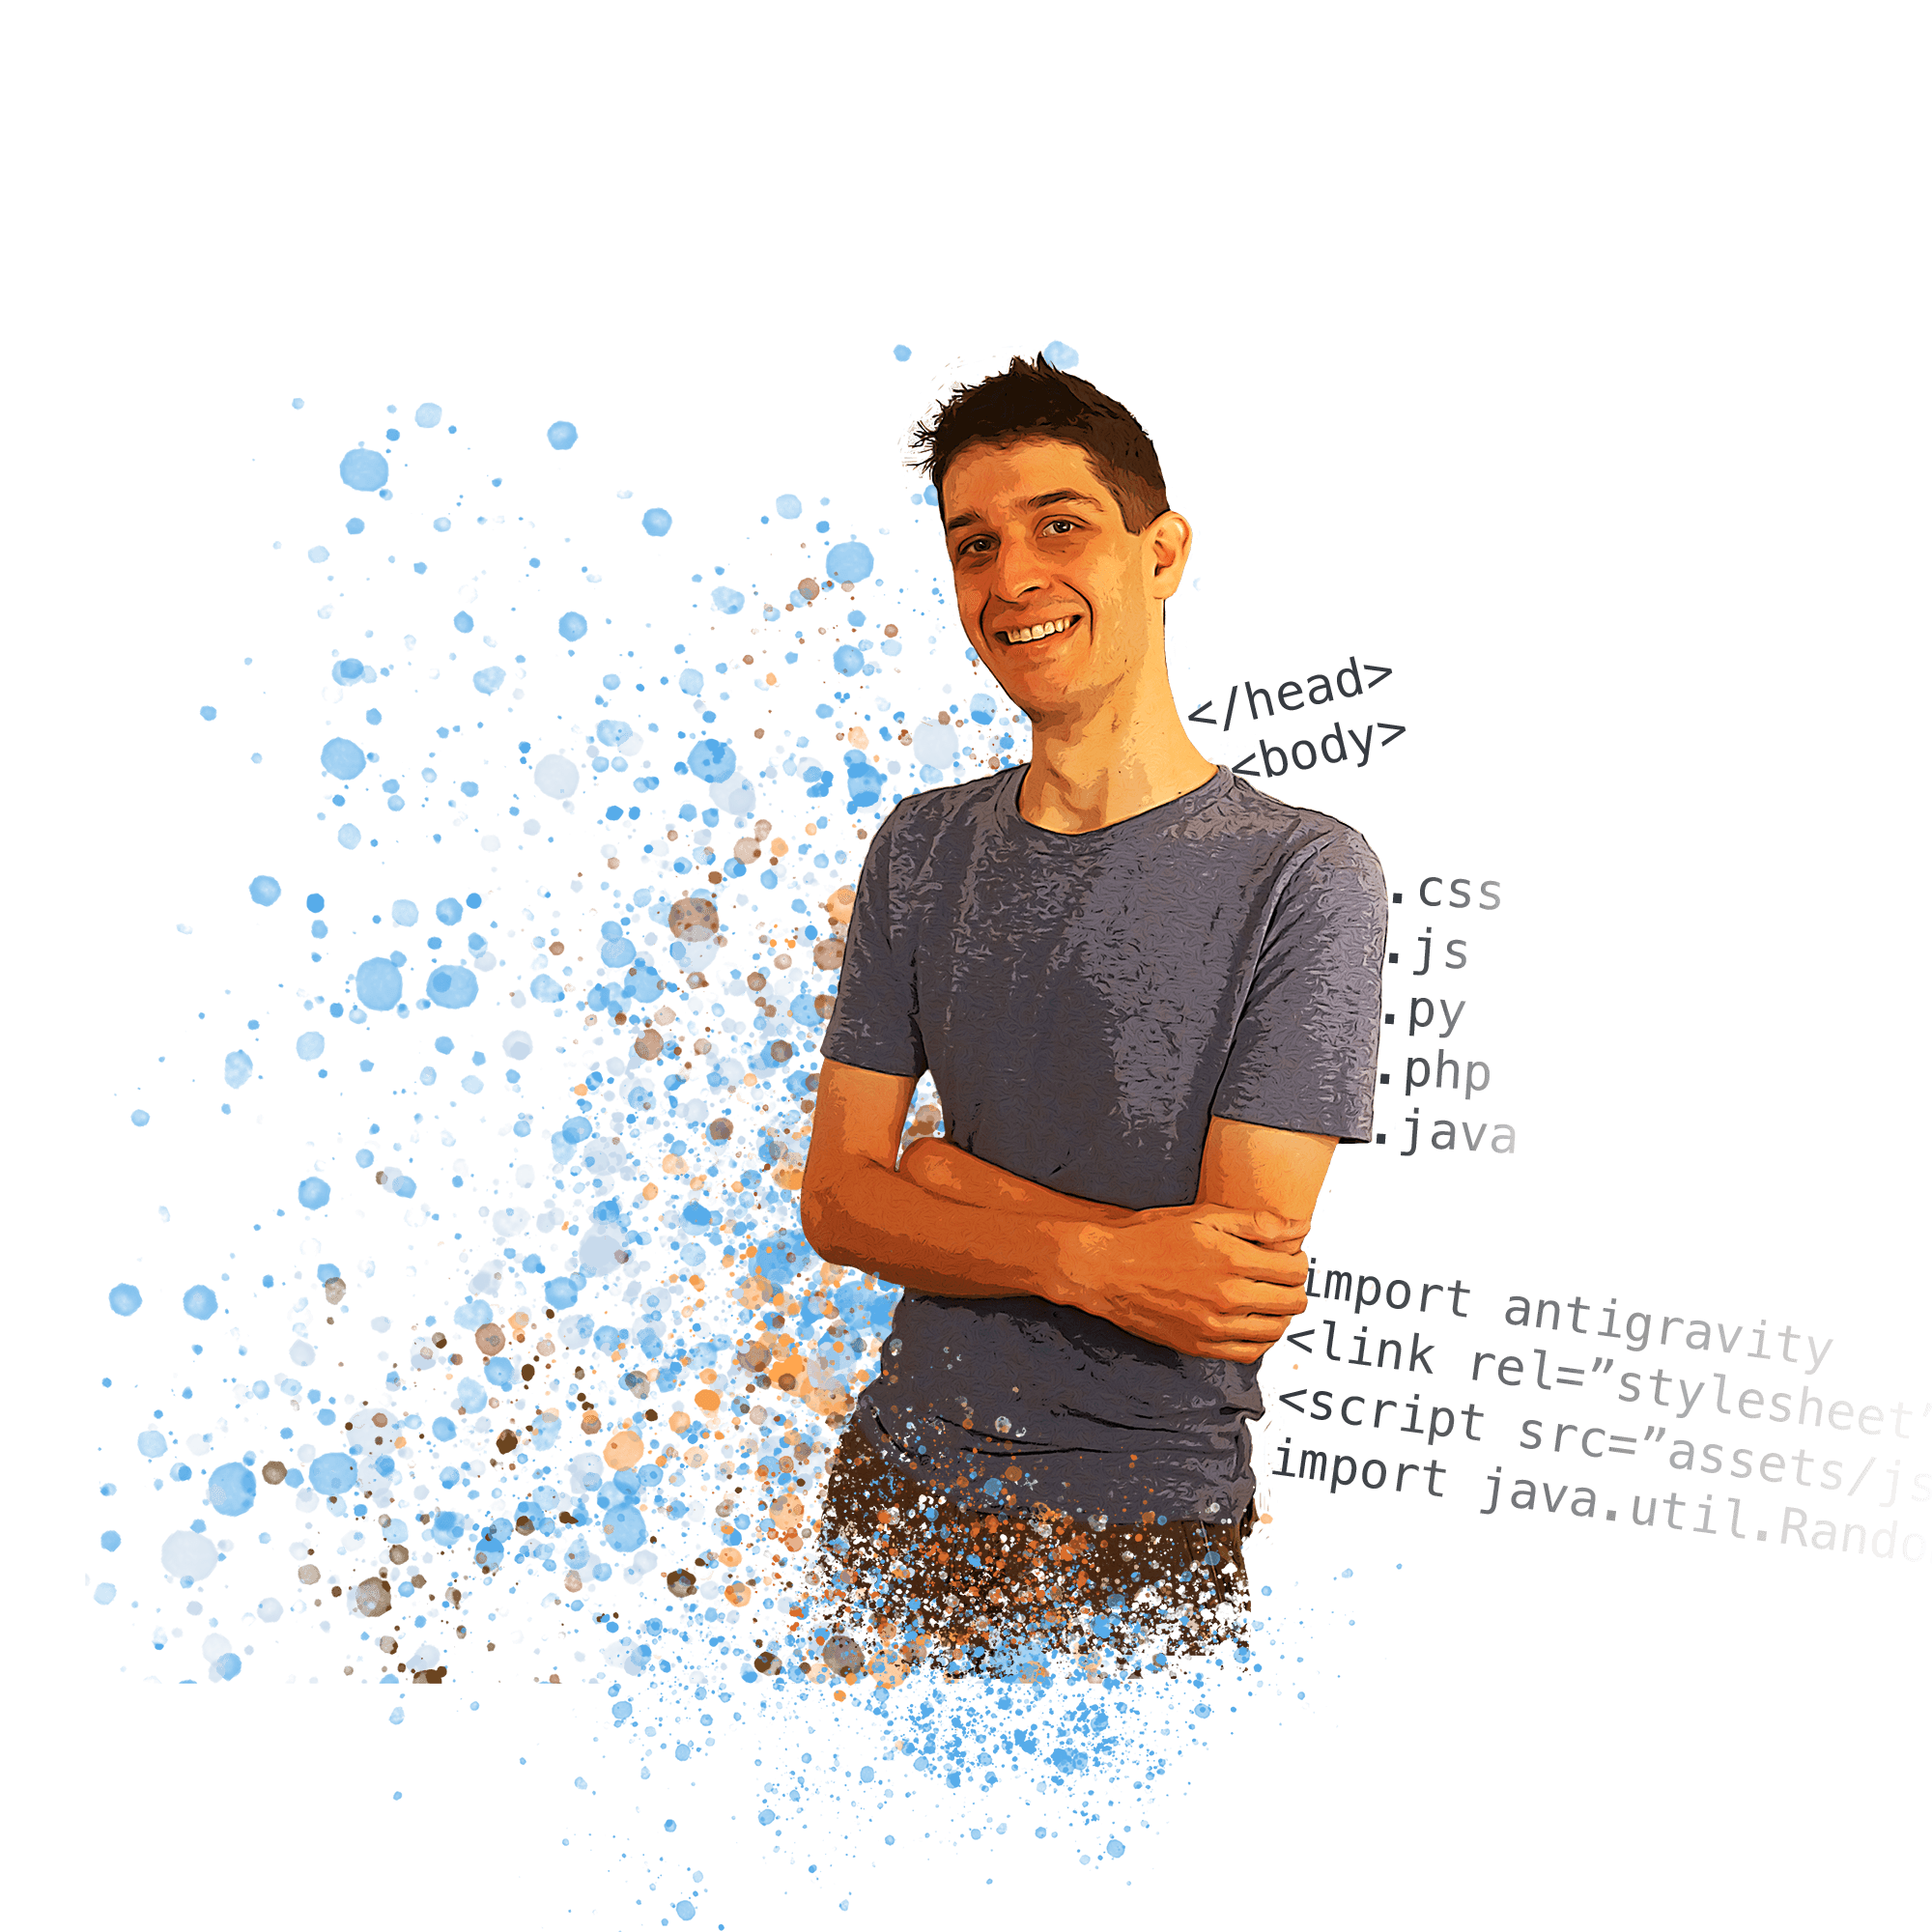 Image of Aaron Medlock, a Sacramento Developer and Designer with paint splatter and code in background